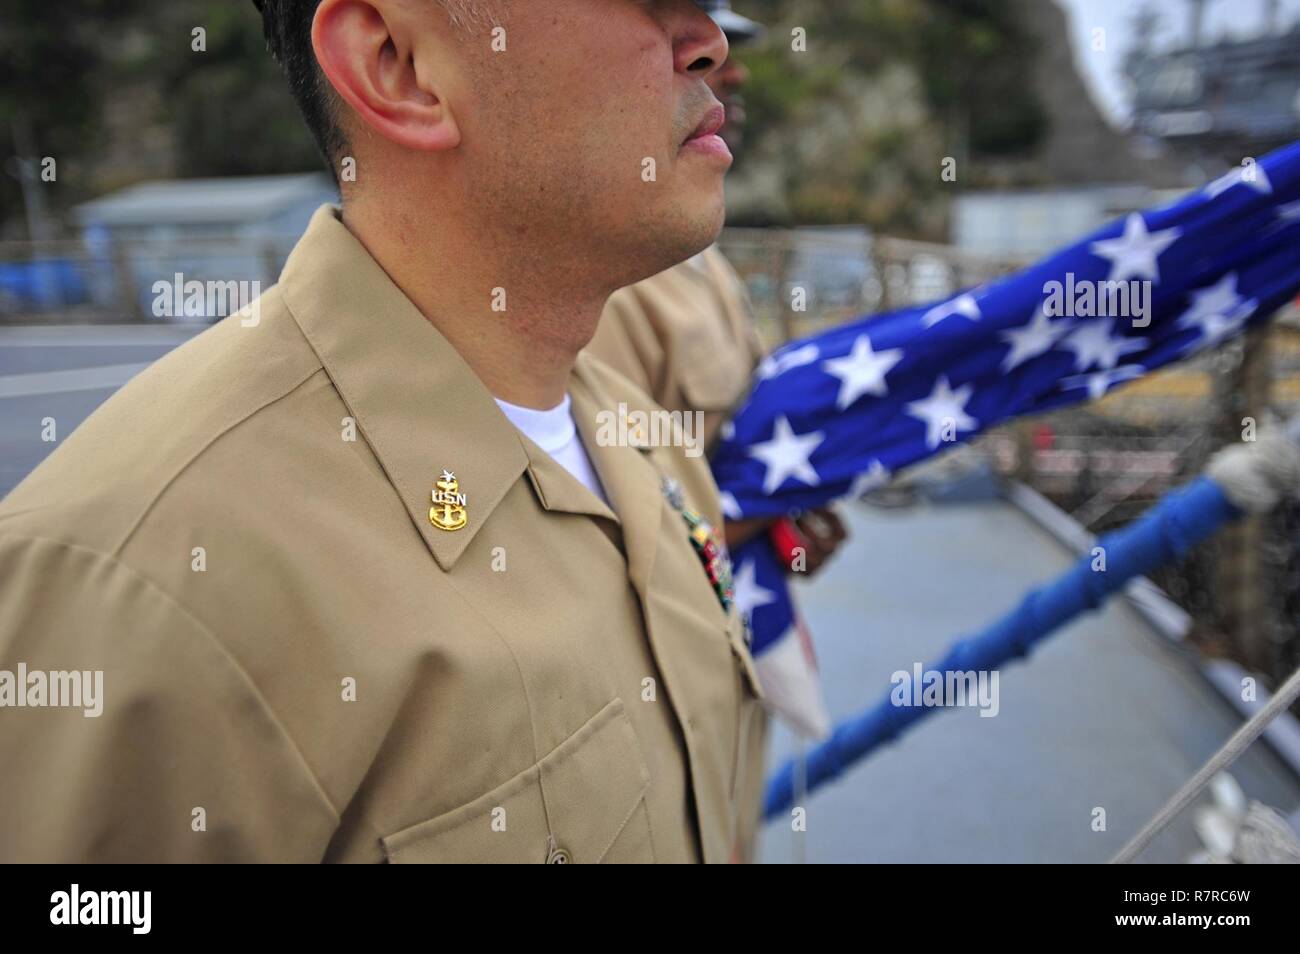 YOKOSUKA, Japan (March 31, 2017) - Senior Chief Hospital Corpsman Michael Jimenez, attached to the U.S. 7th Fleet flagship USS Blue Ridge (LCC 19), performs morning colors in honor of fallen chiefs the day prior to the chief petty officers' 124th birthday. The rank of chief petty officer was officially established on April 1, 1893. Blue Ridge is in an extensive maintenance period in order to modernize the ship to continue to serve as a robust communications platform in the U.S. 7th Fleet area of operations. Stock Photo